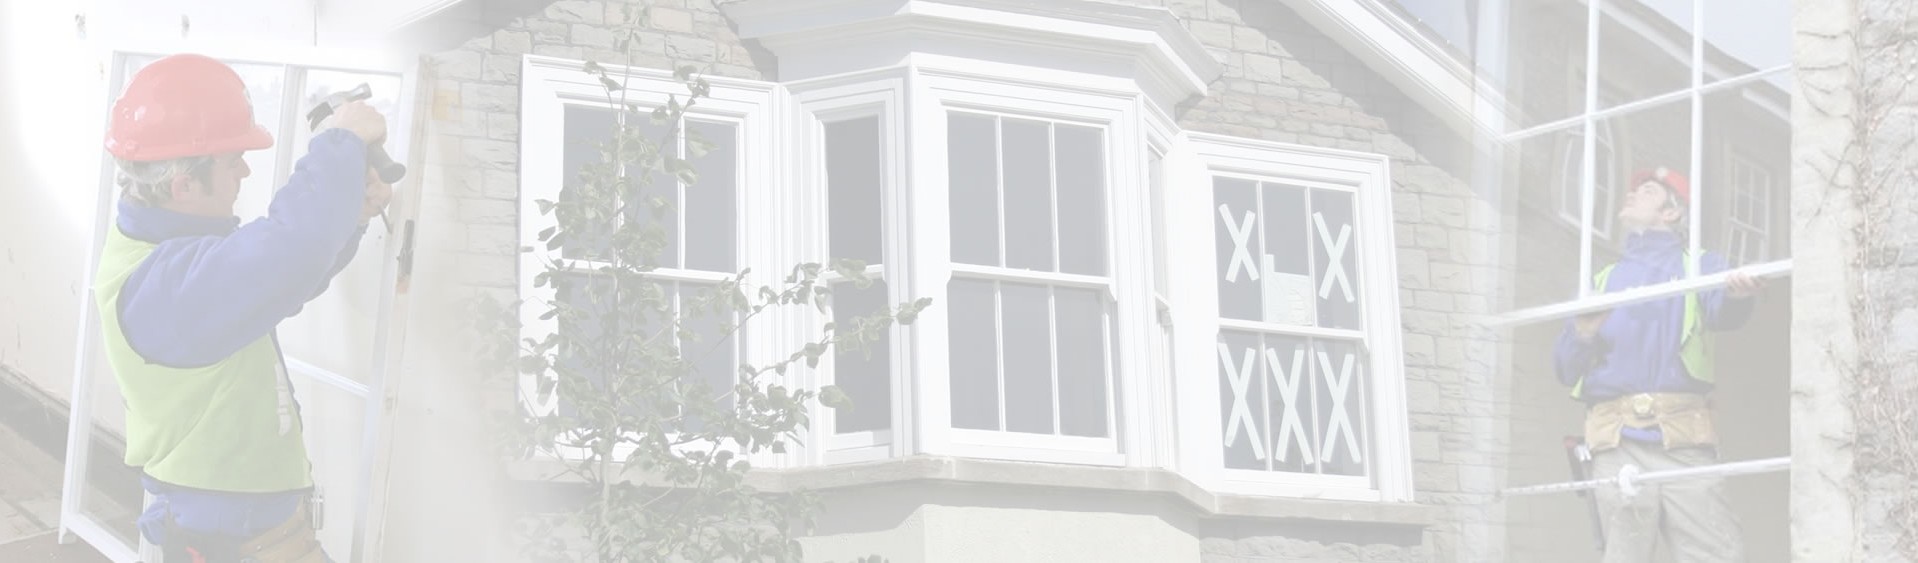 Sash window restoration being carried out by our sash repair experts